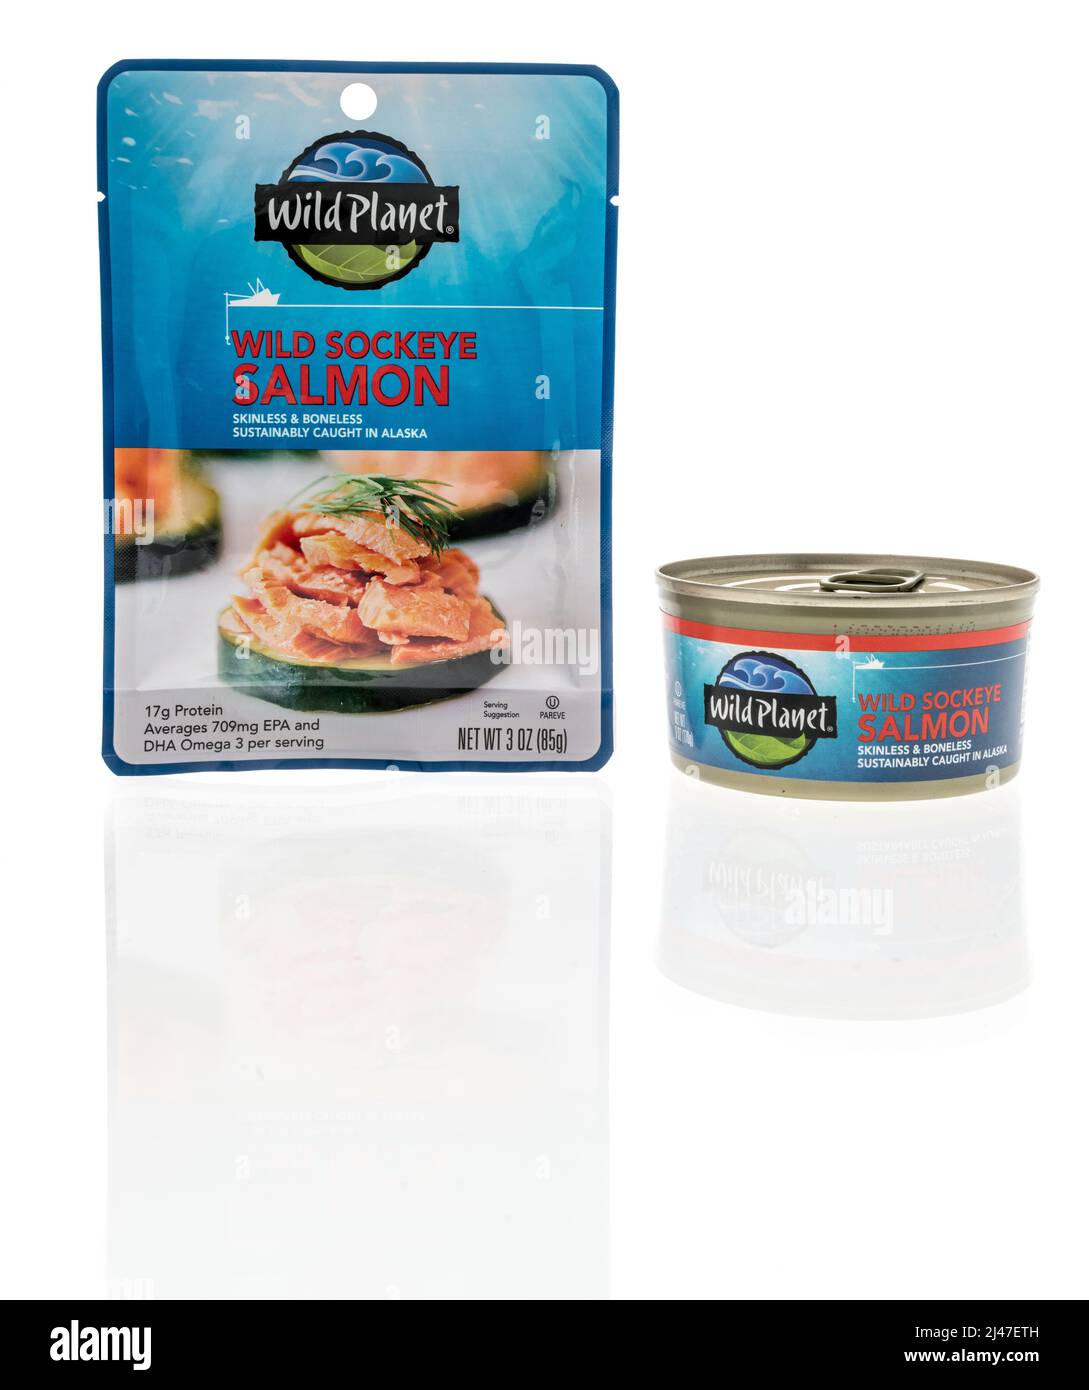 Winneconne, WI -10 April 2022: A can and package of Wild planet wild sockeye salmon on an isolated background Stock Photo